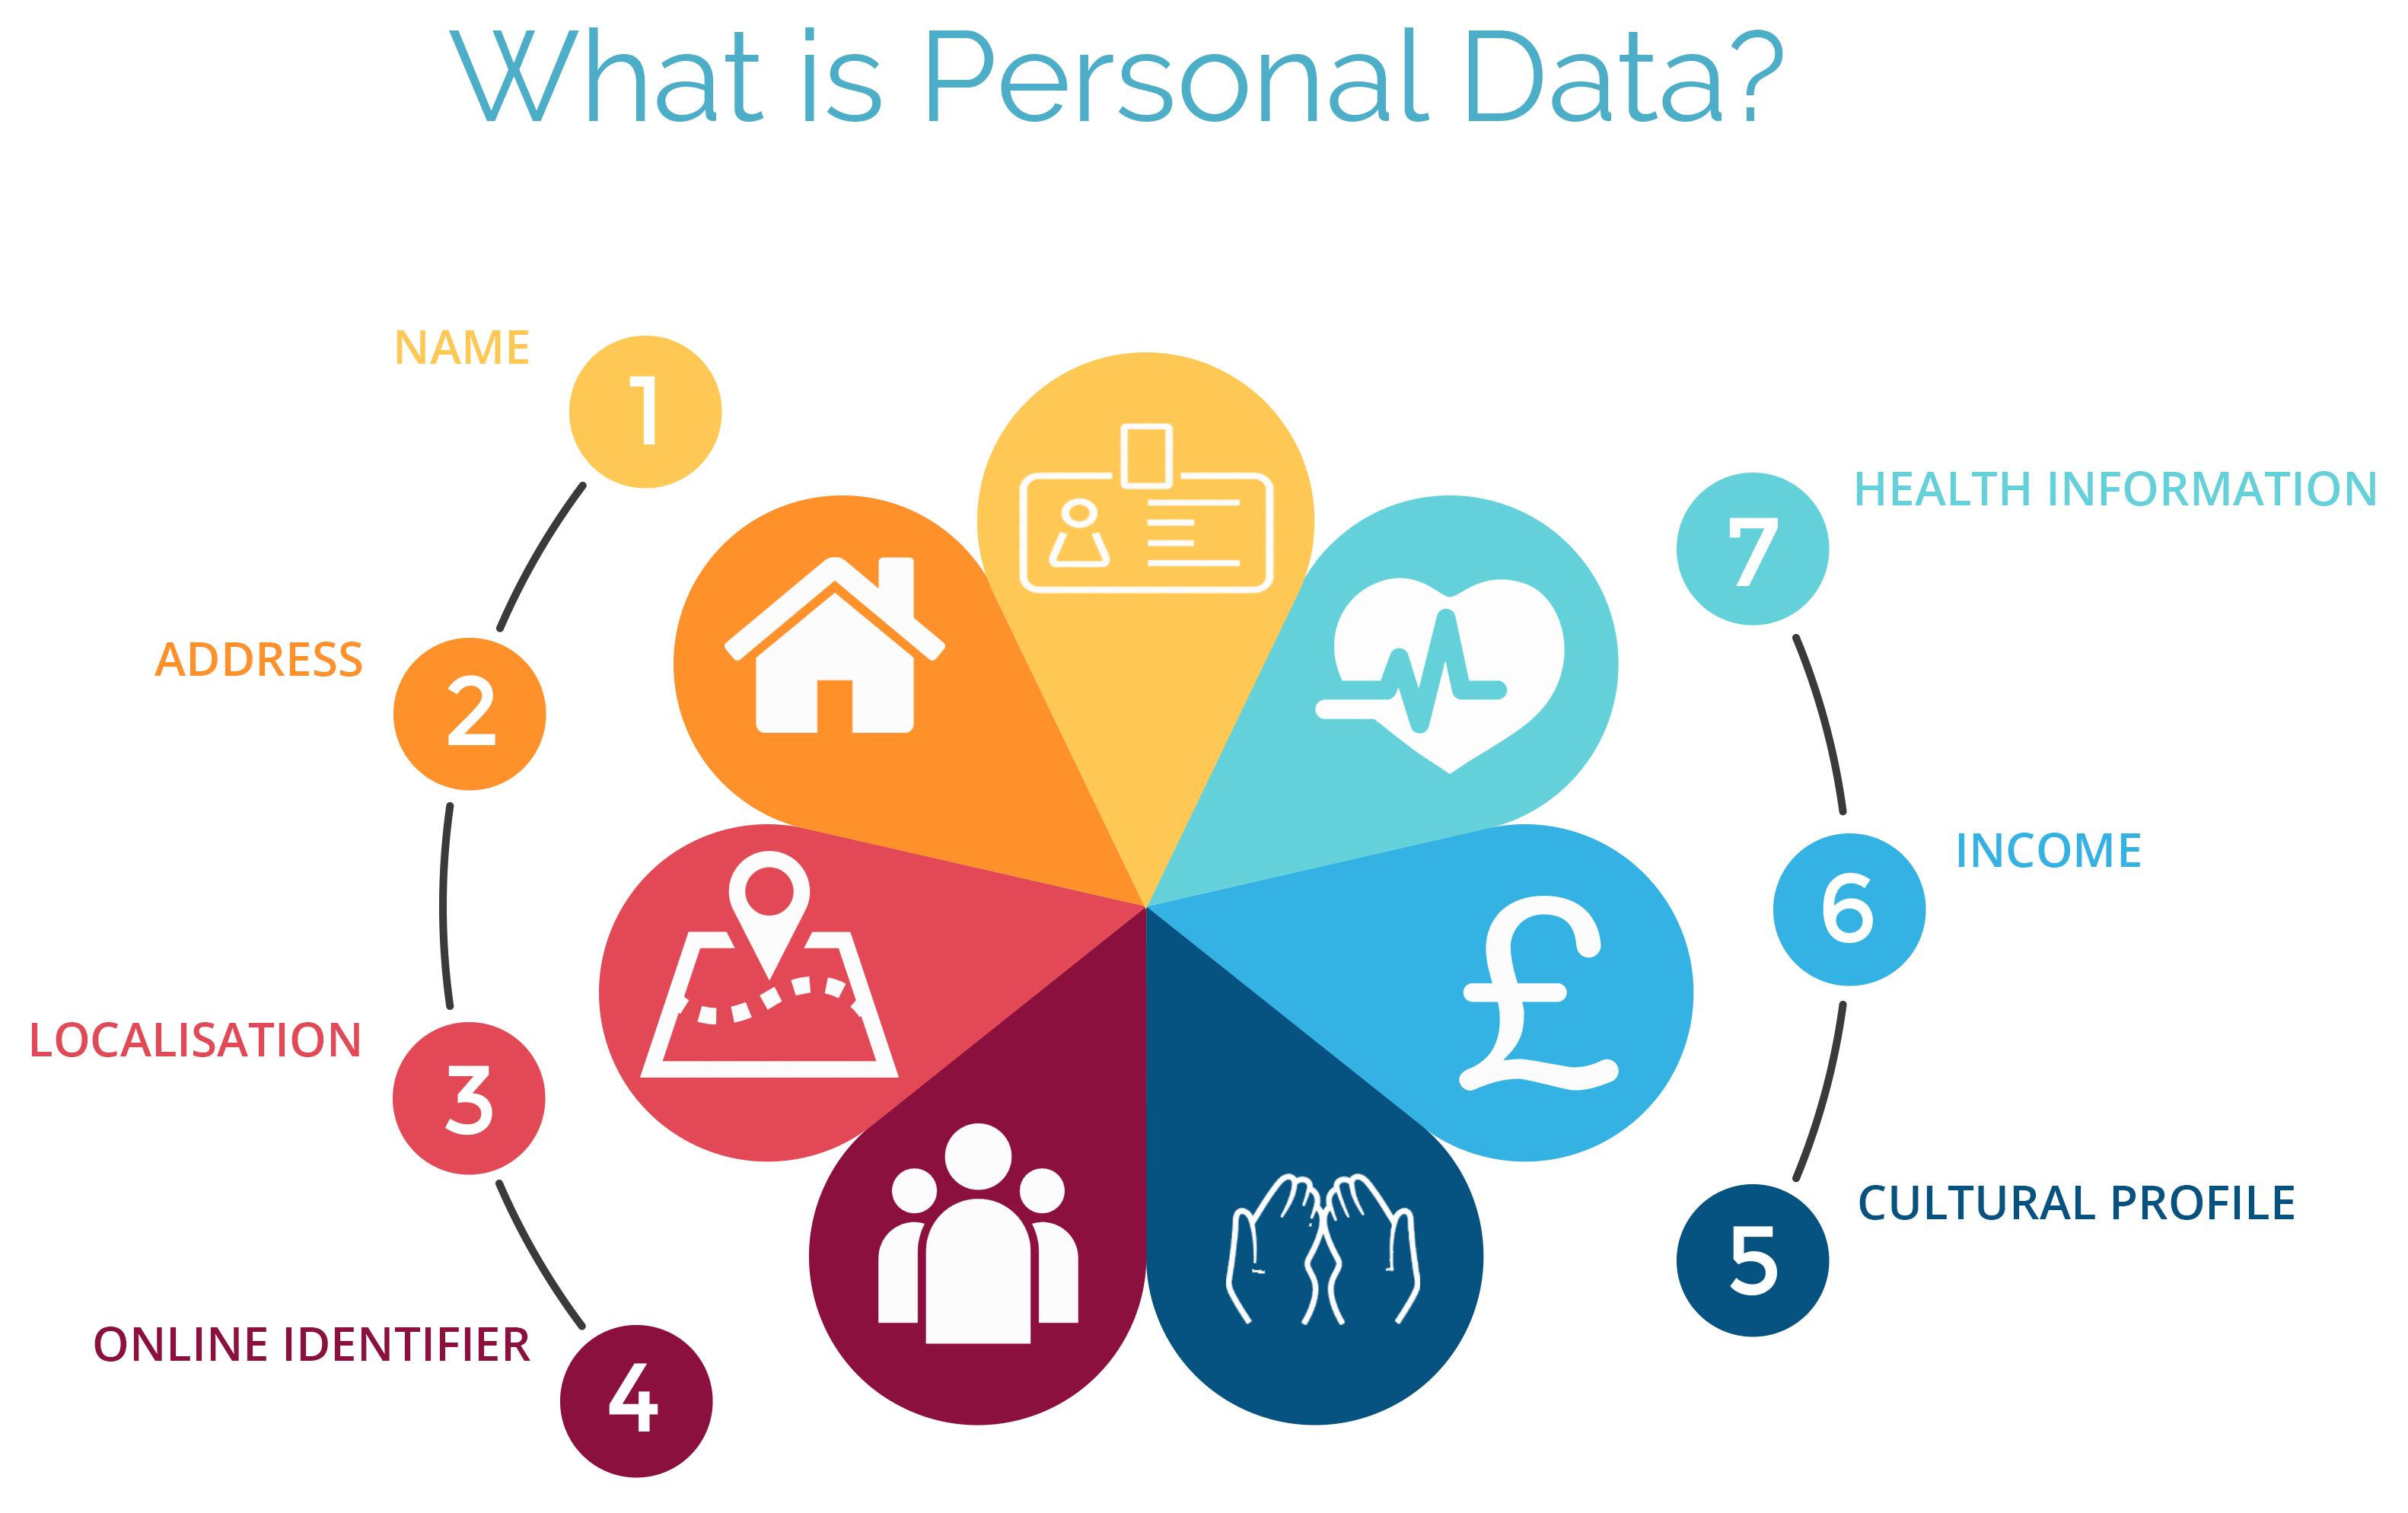 The different aspects of personal data, including name, address, location, identifiers, etc.